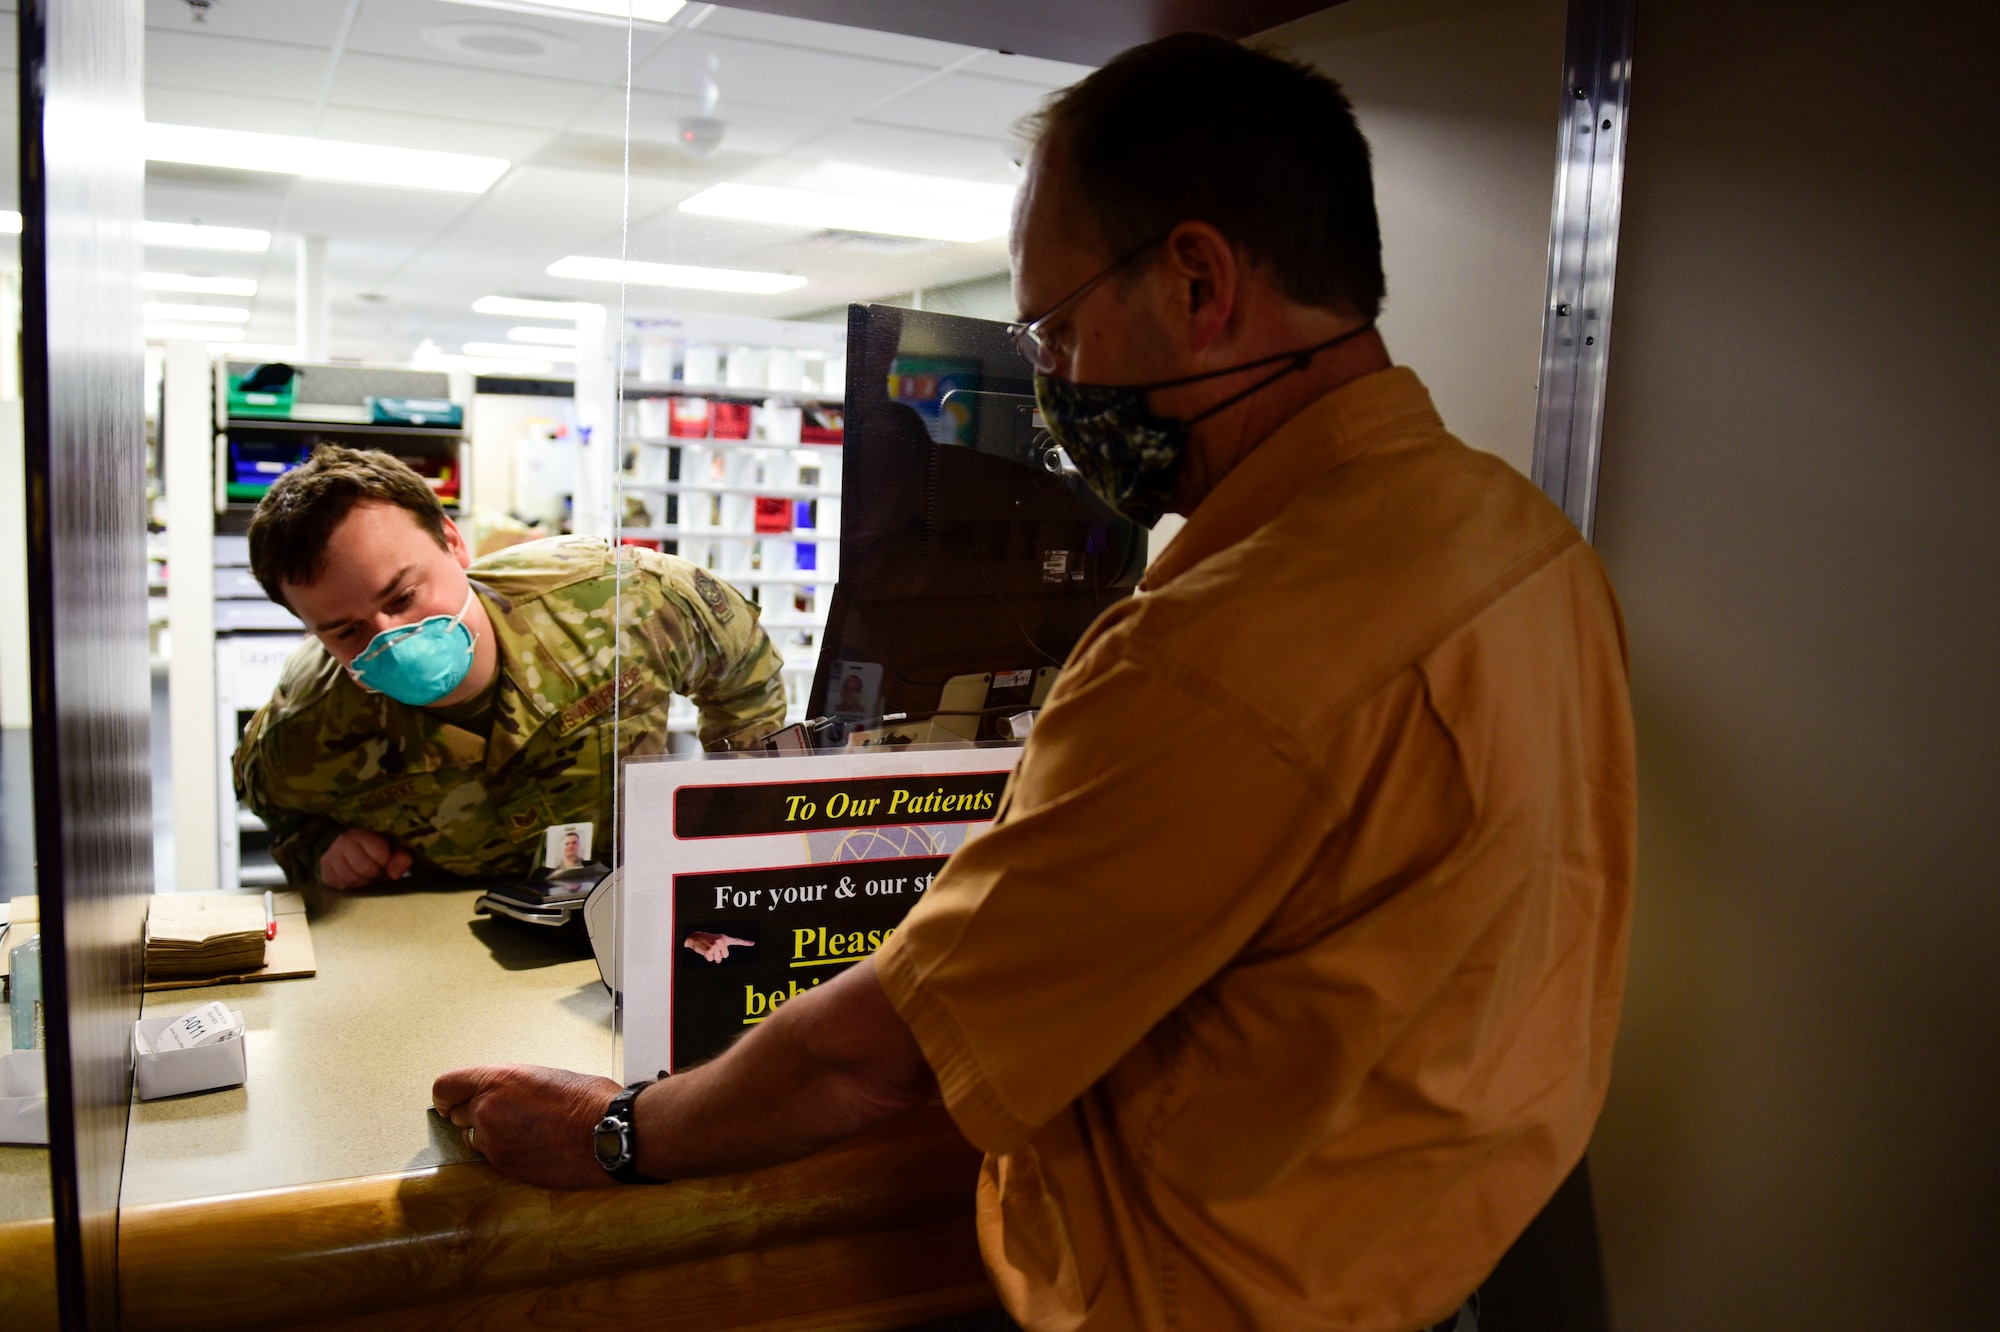 Staff Sgt. Sean Rourke (pictured left), 92nd Medical Support Squadron pharmacy technician, demonstrates a ‘hands-off’ approach for pharmacy technicians to verify a beneficiaries military identification card, May 29, 2020, at Fairchild Air Force Base, Wash. This verification technique, amongst other safety precautions, was put in place to aid in preventing the potential spread of the 2019 Coronavirus to keep pharmacy staff and patients safe. (U.S. Air Force photo by Staff Sgt. Nick J. Daniello)